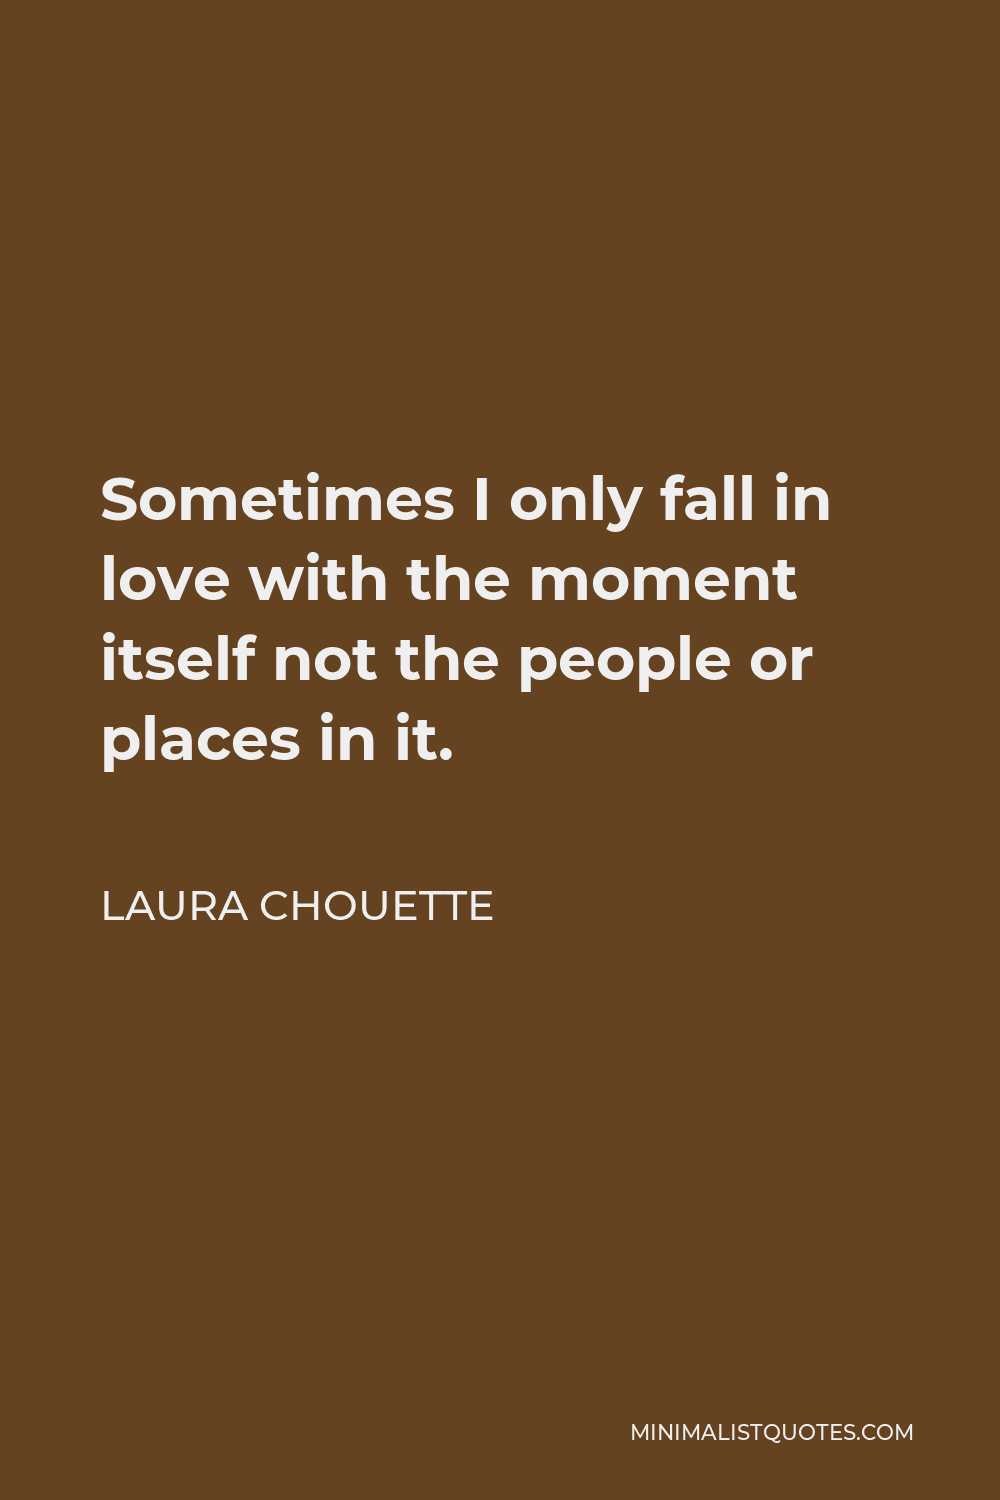 Laura Chouette Quote - Sometimes I only fall in love with the moment itself not the people or places in it.